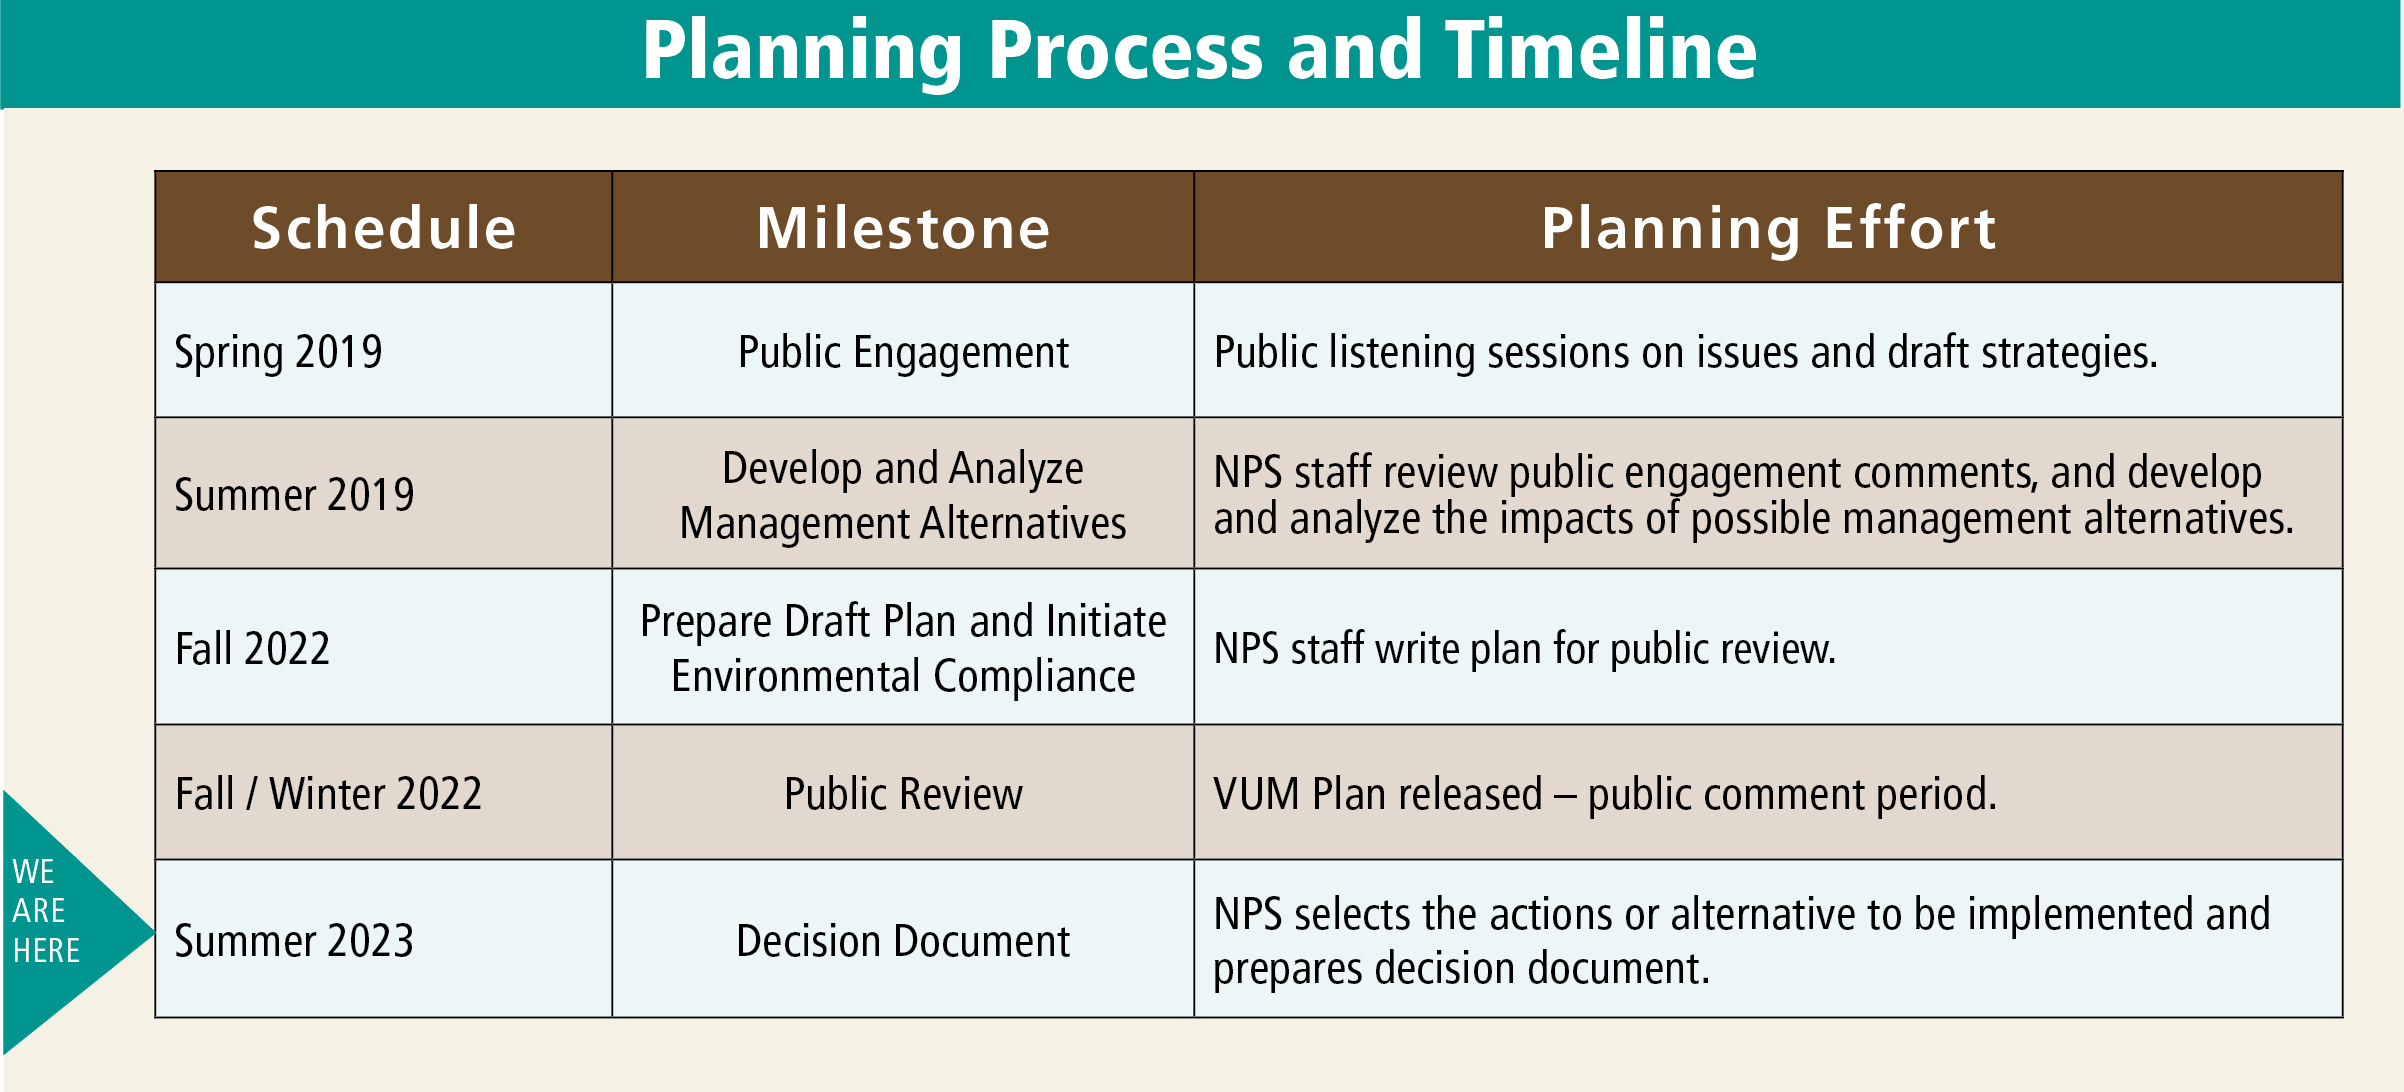 Chart showing the planning process for the visitor use management plan. arrow indicates we are at the phase of decision document where NPS selects the actions or alternatives to be implemented and prepares decision document, anticipated by summer 2023.